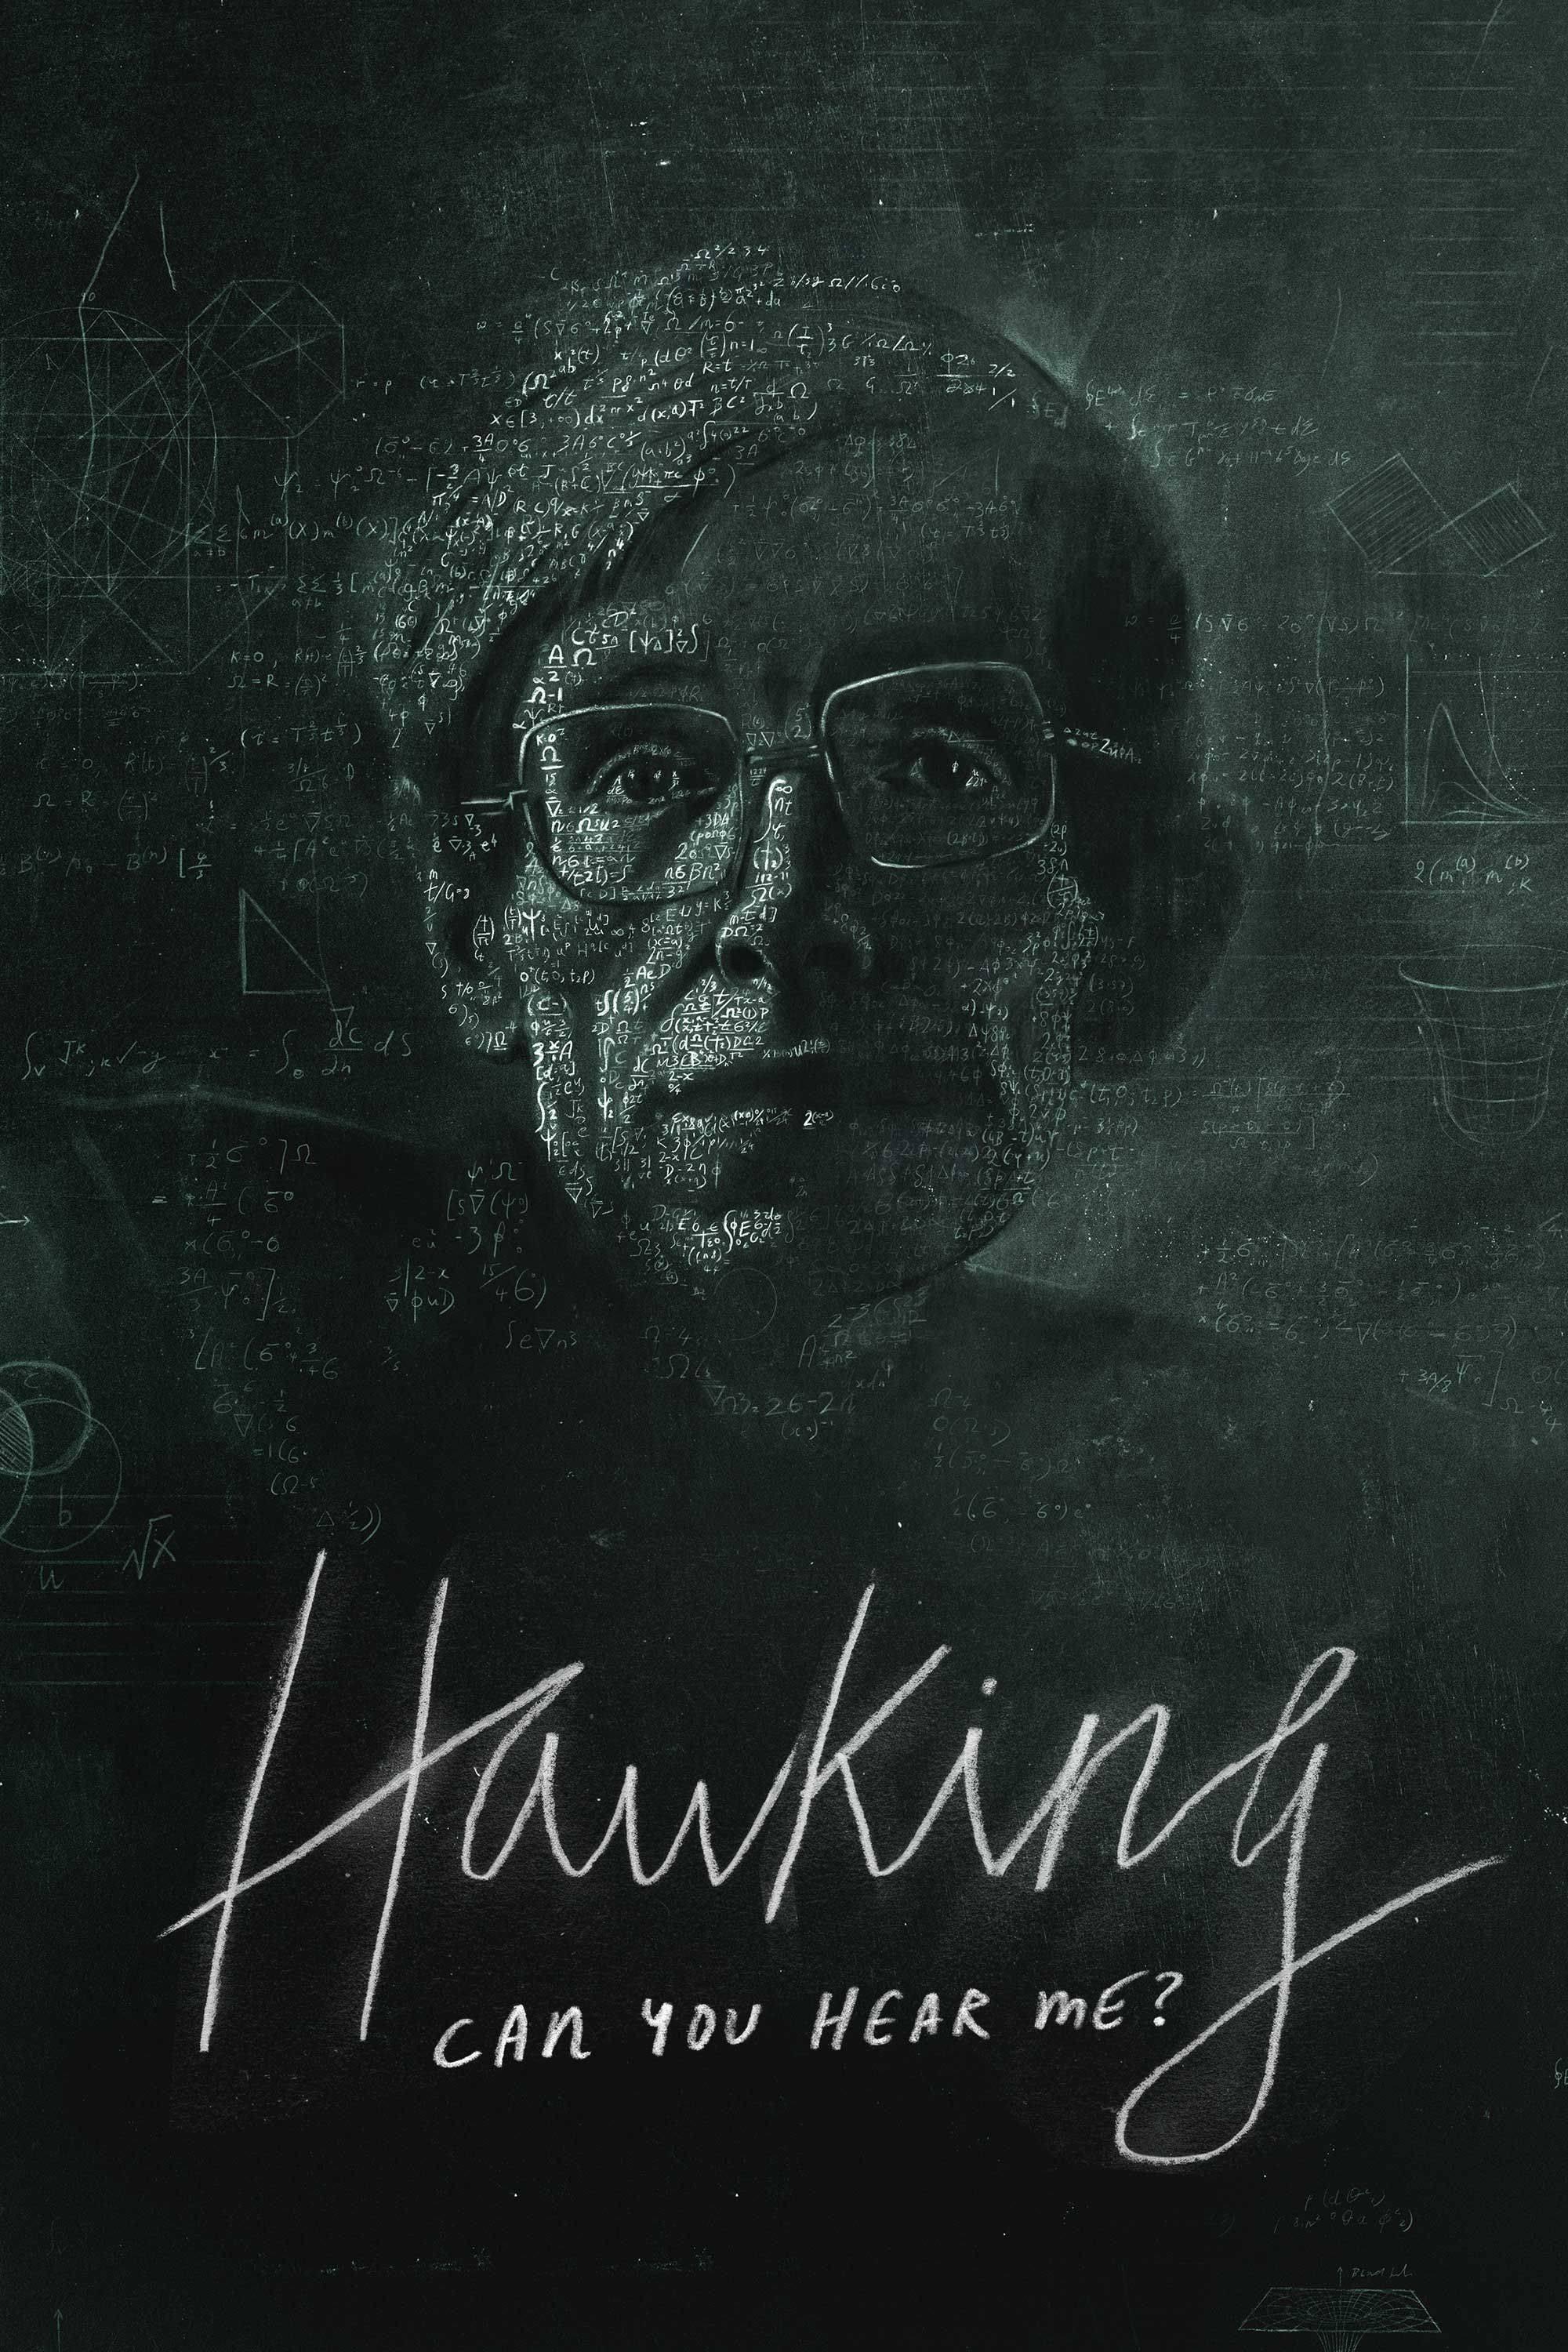 Hawking: Can You Hear Me? poster